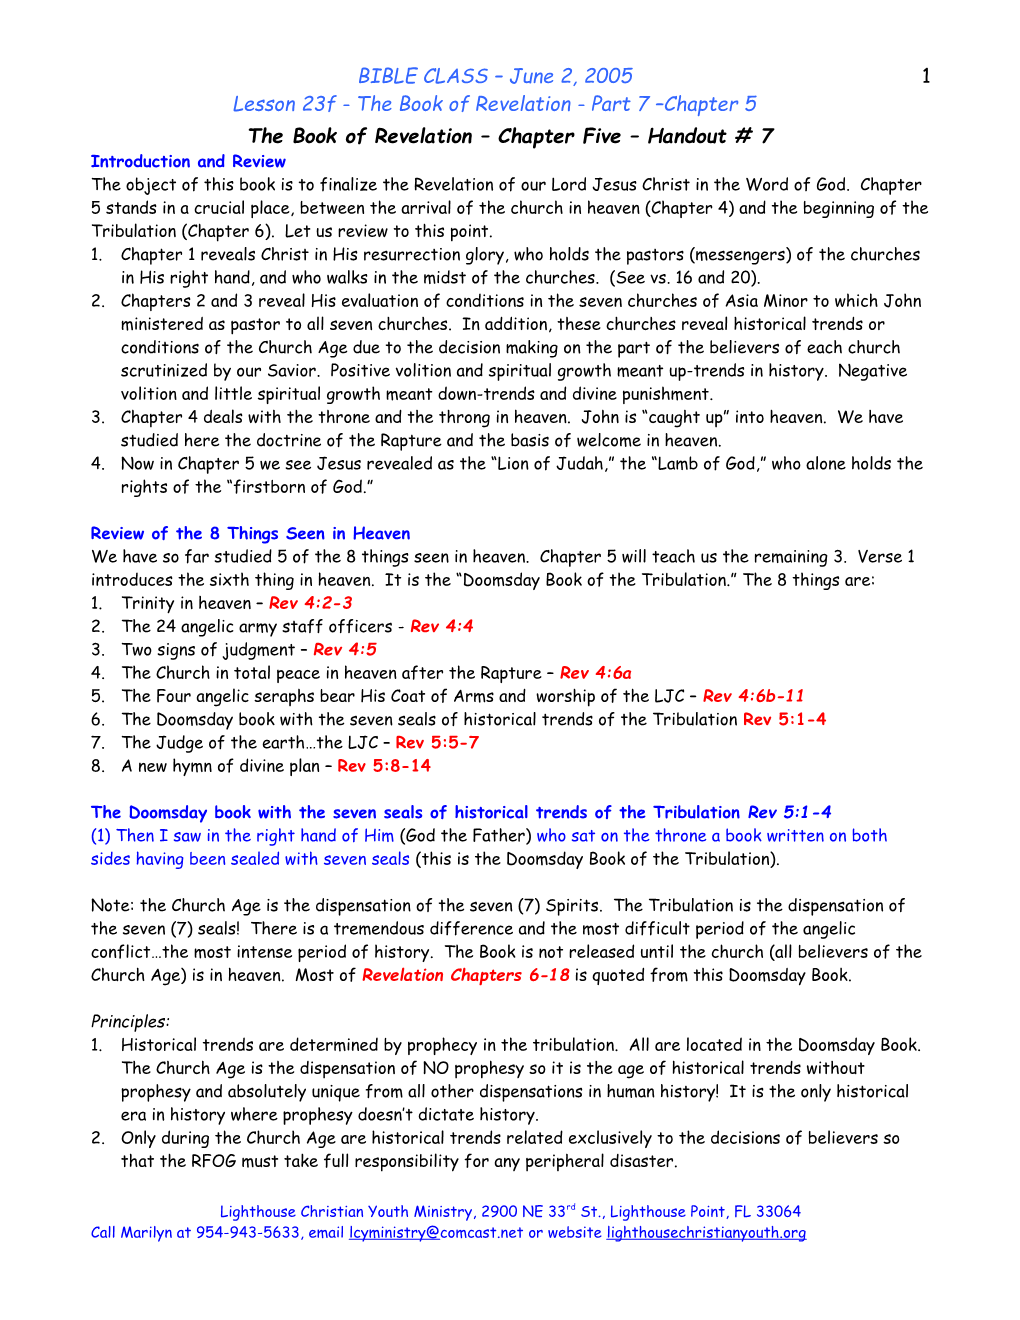 The Book of Revelation Chapter Five Handout # 7